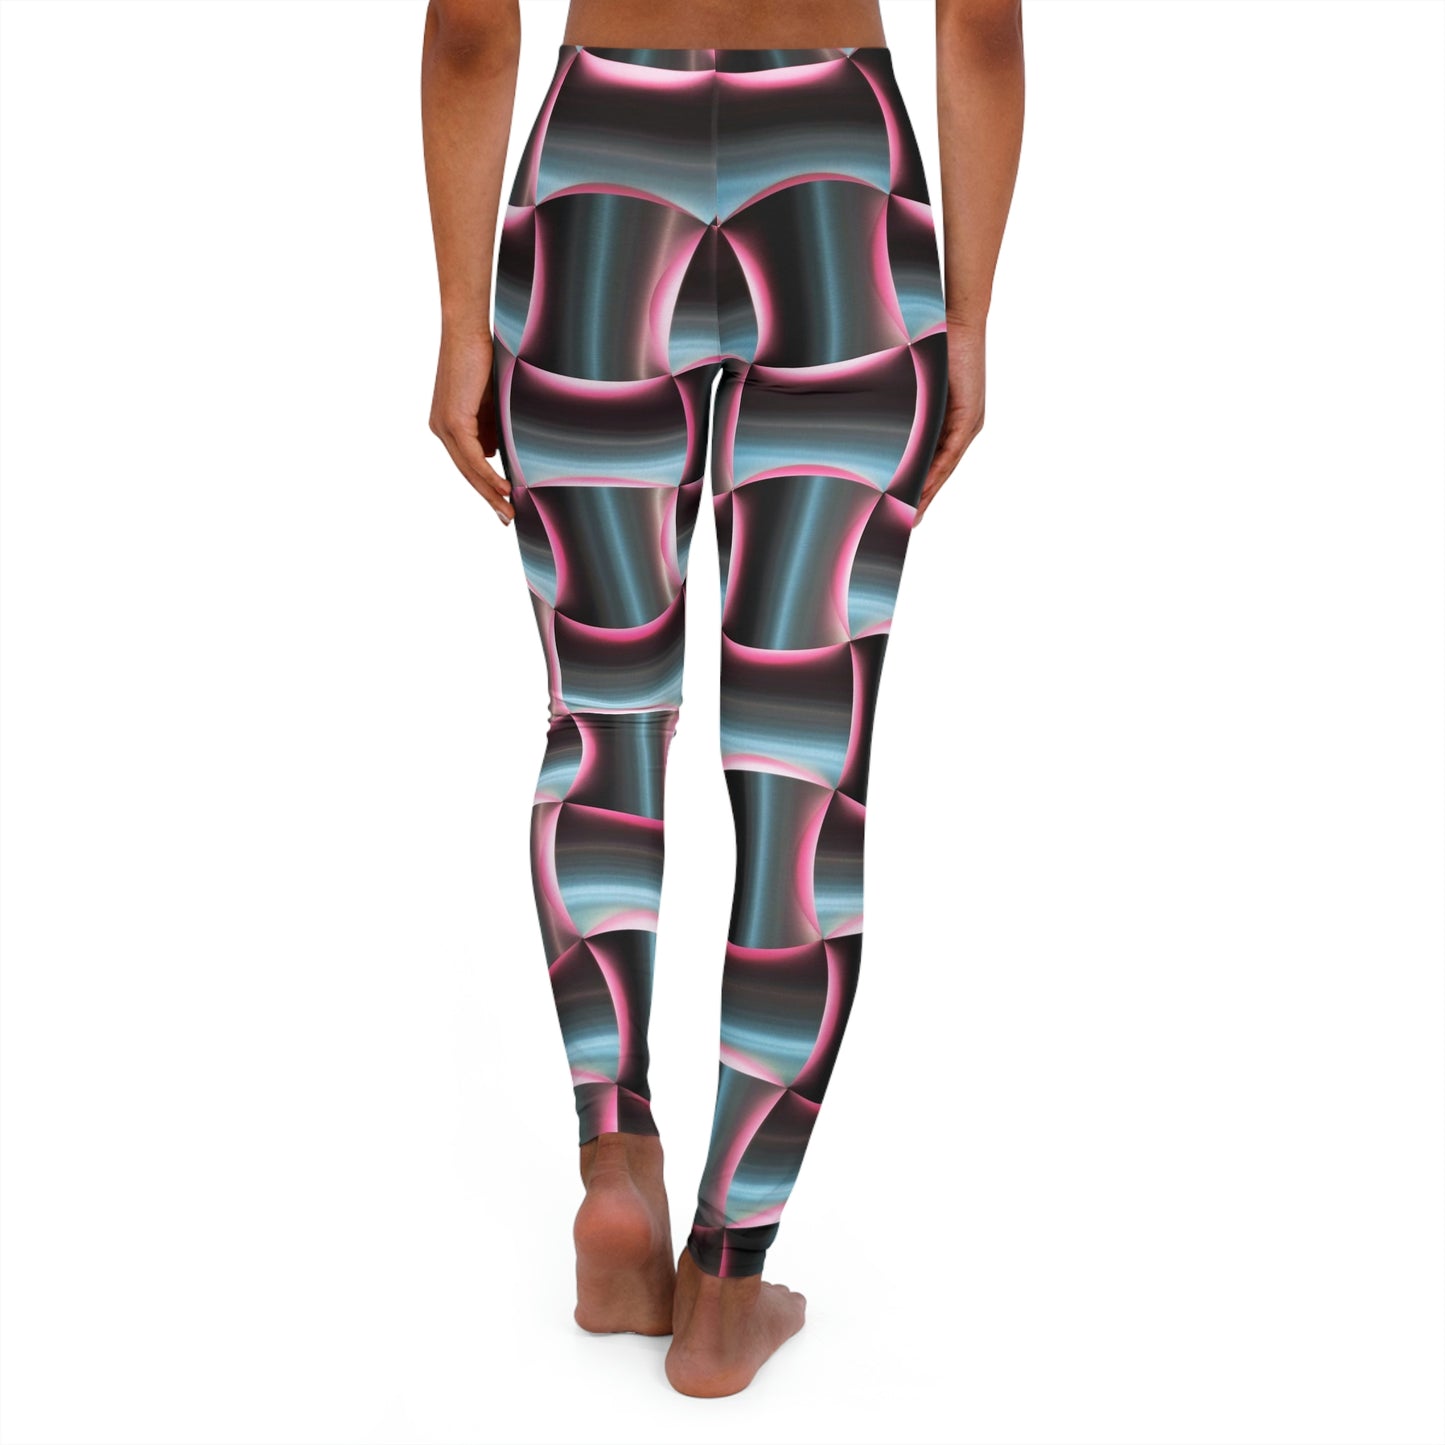 Robot Women's Leggings Plus Size Leggings One of a Kind Gift - Unique Workout Activewear tights for Mom fitness, Mothers Day, Girlfriend Christmas Gift